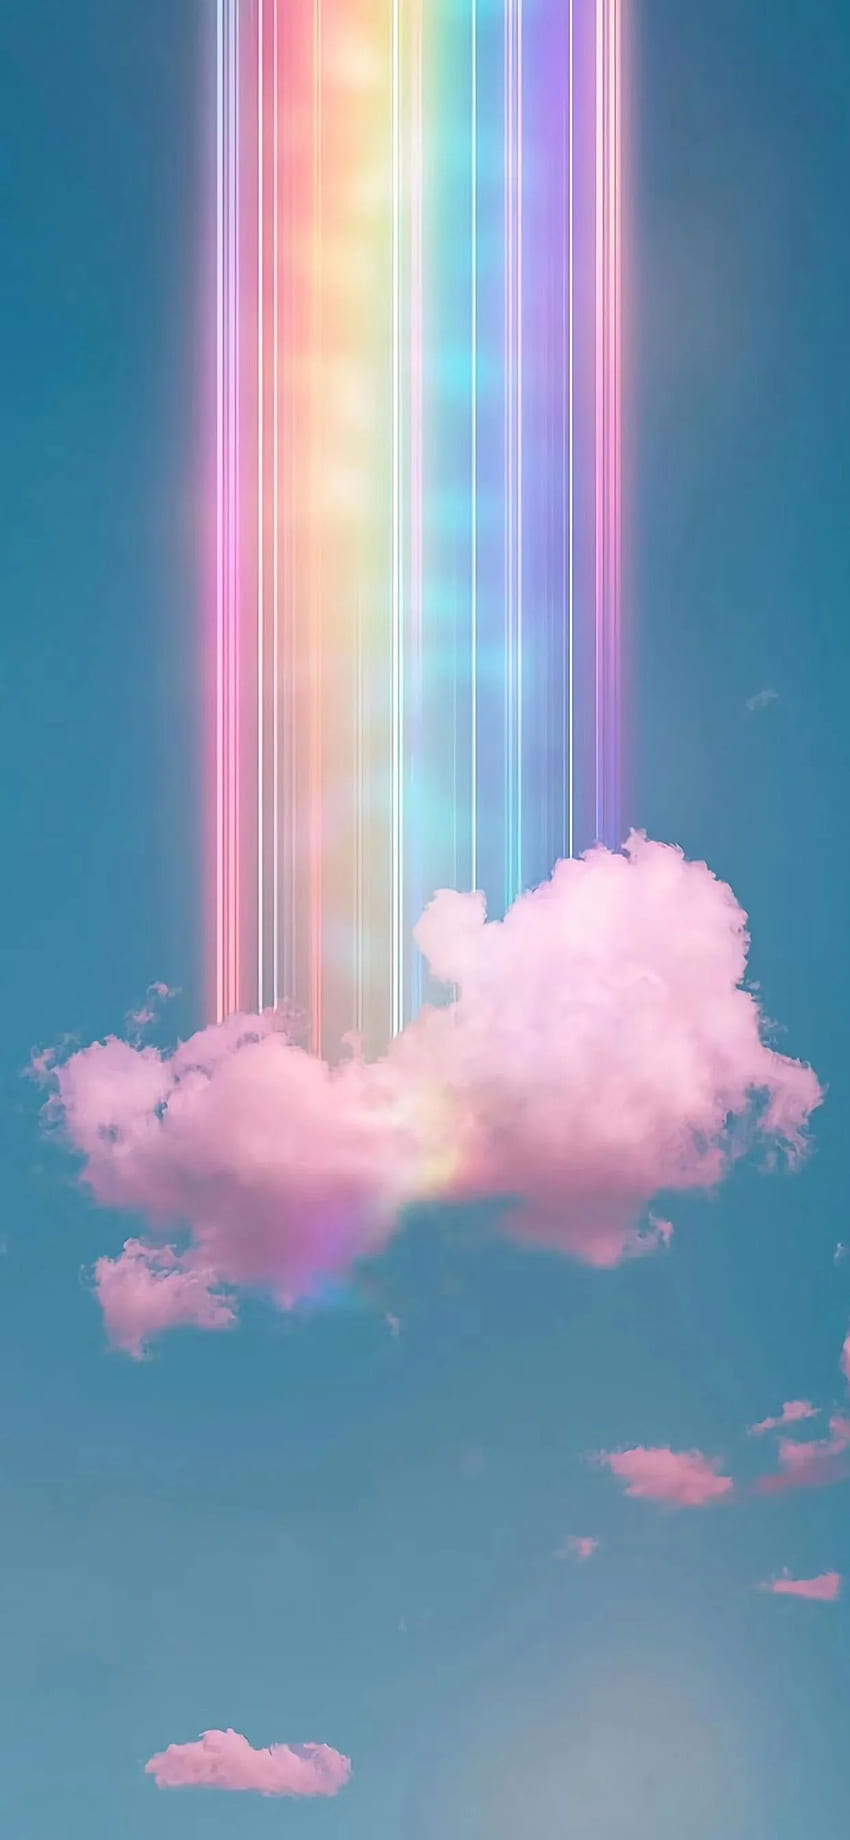 Aesthetic Rainbow & Clouds Wallpaper - Cool Rainbow Wallpapers-cheohanoi.vn